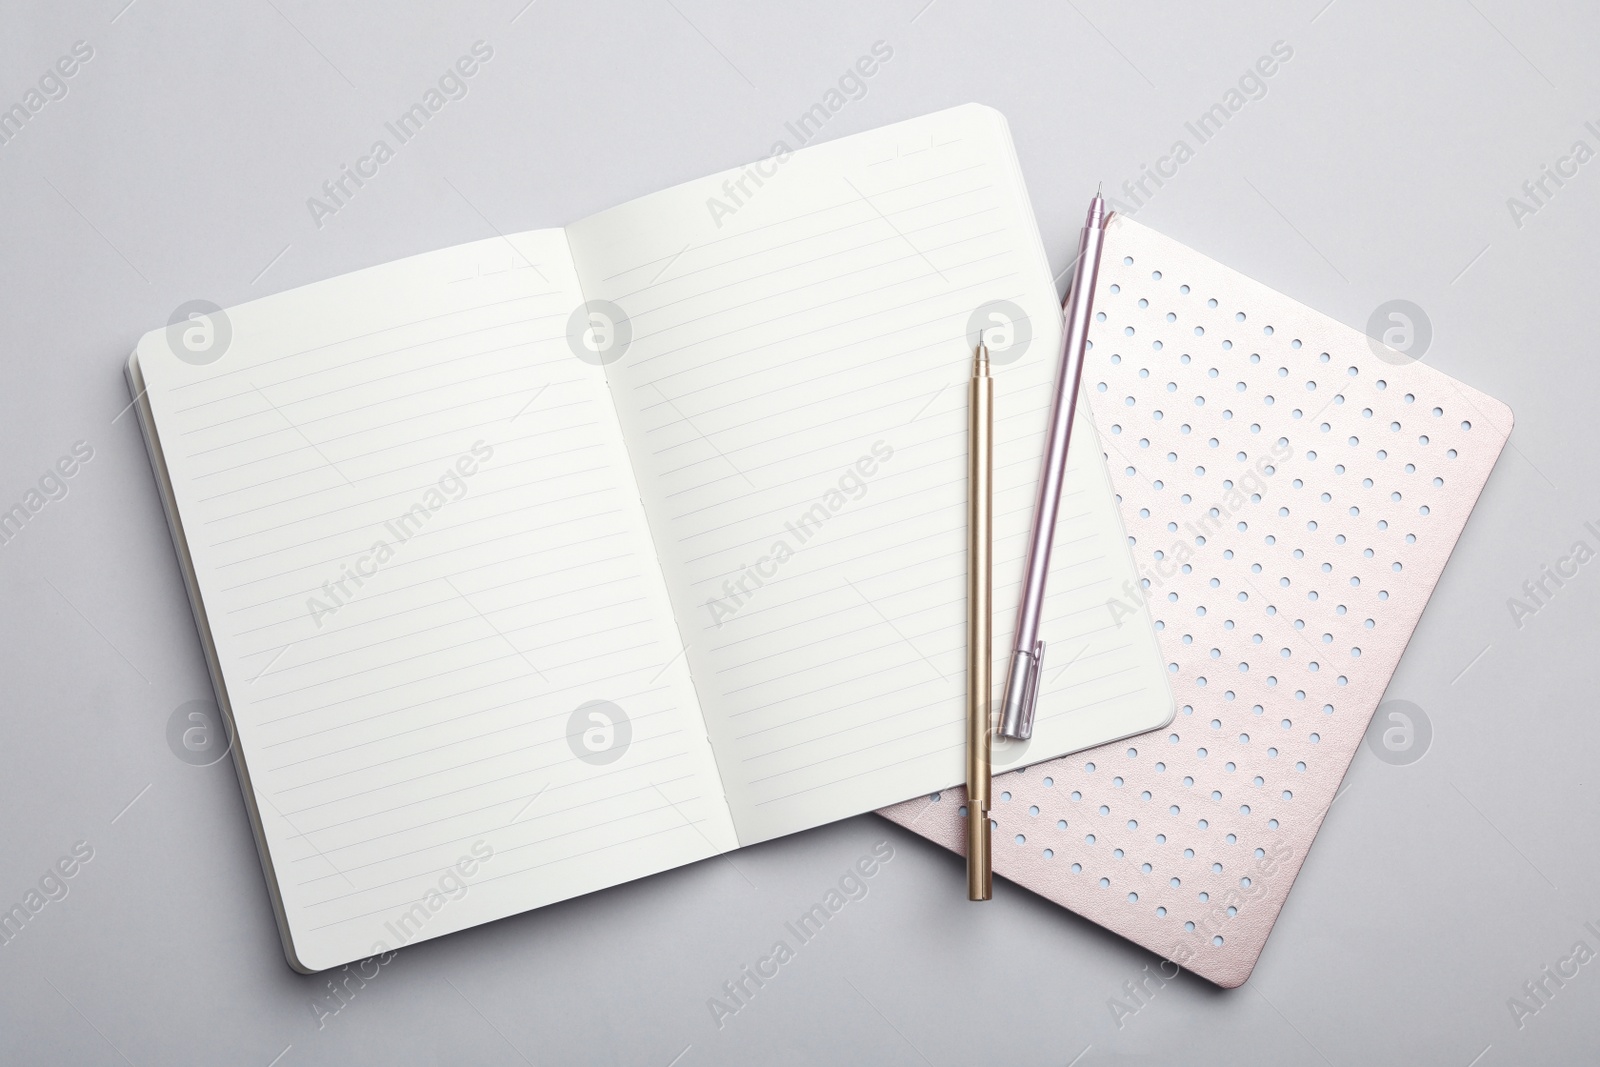 Photo of Stylish notebooks and pens on grey background, top view